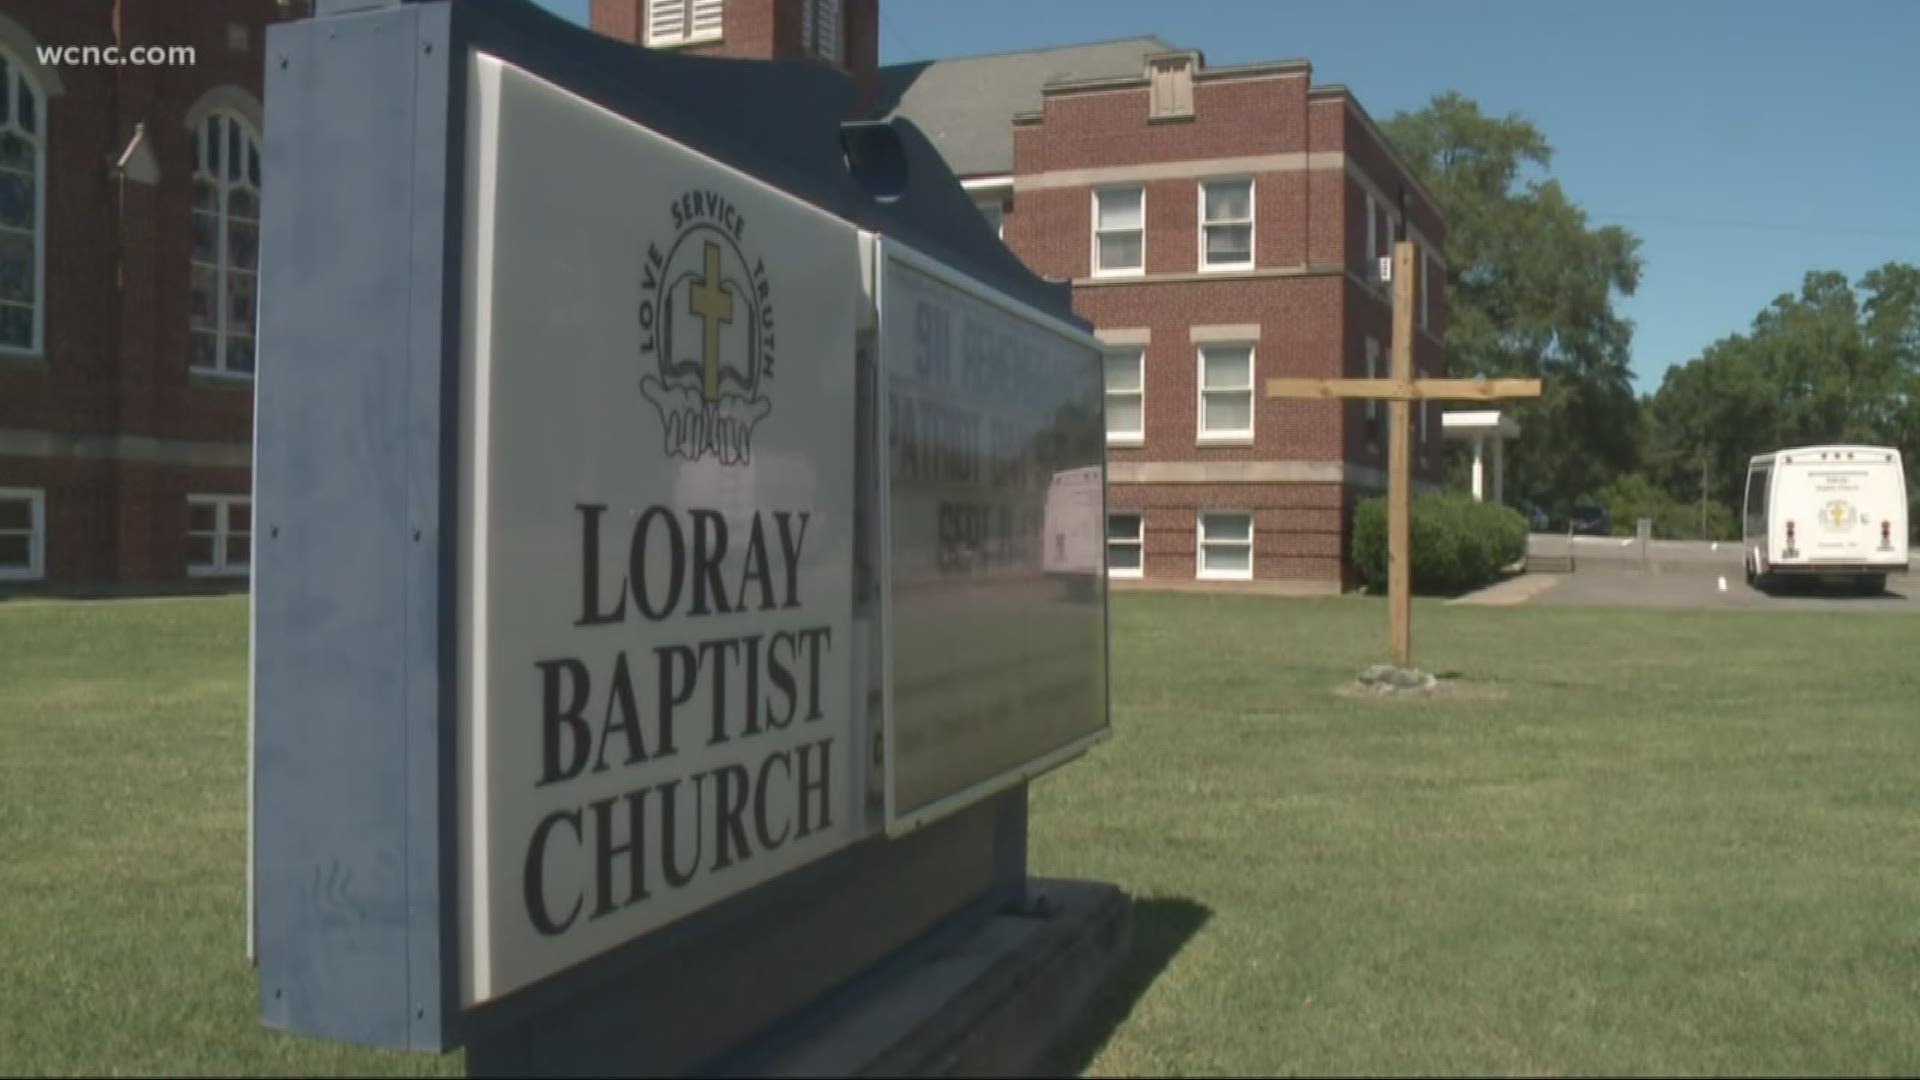 Police say Mt. Zion Church of God Holiness on the plaza was vandalized sometime Tuesday night into Wednesday afternoon. Within the same two-day period a Gastonia church had several windows busted out.